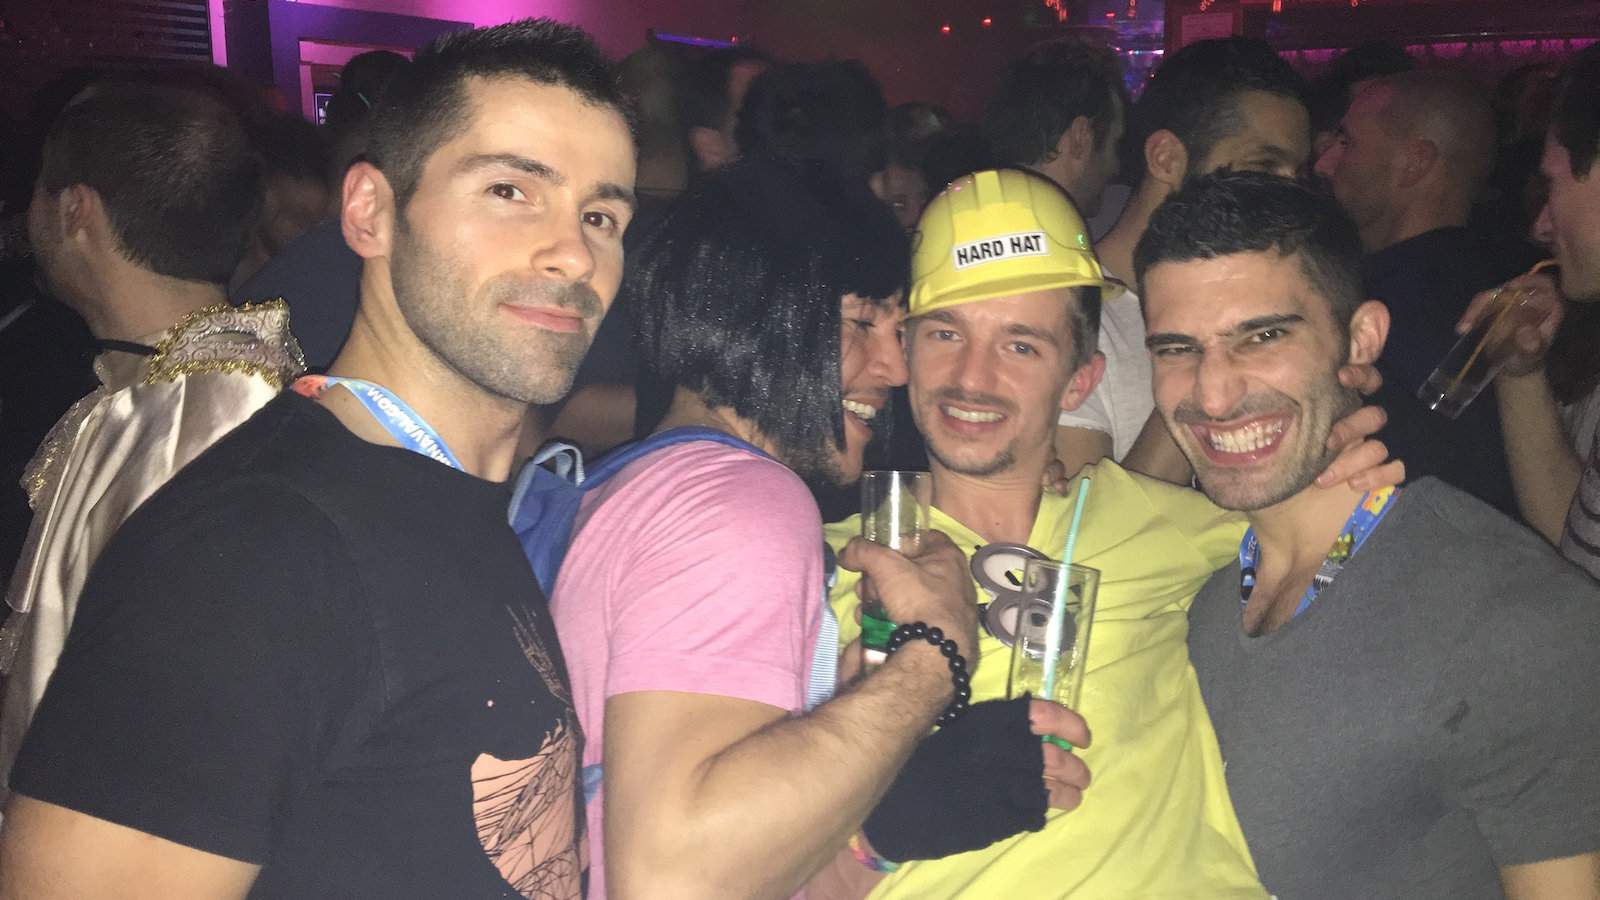 If you like to dance then you'll love partying in Nice's gay clubs